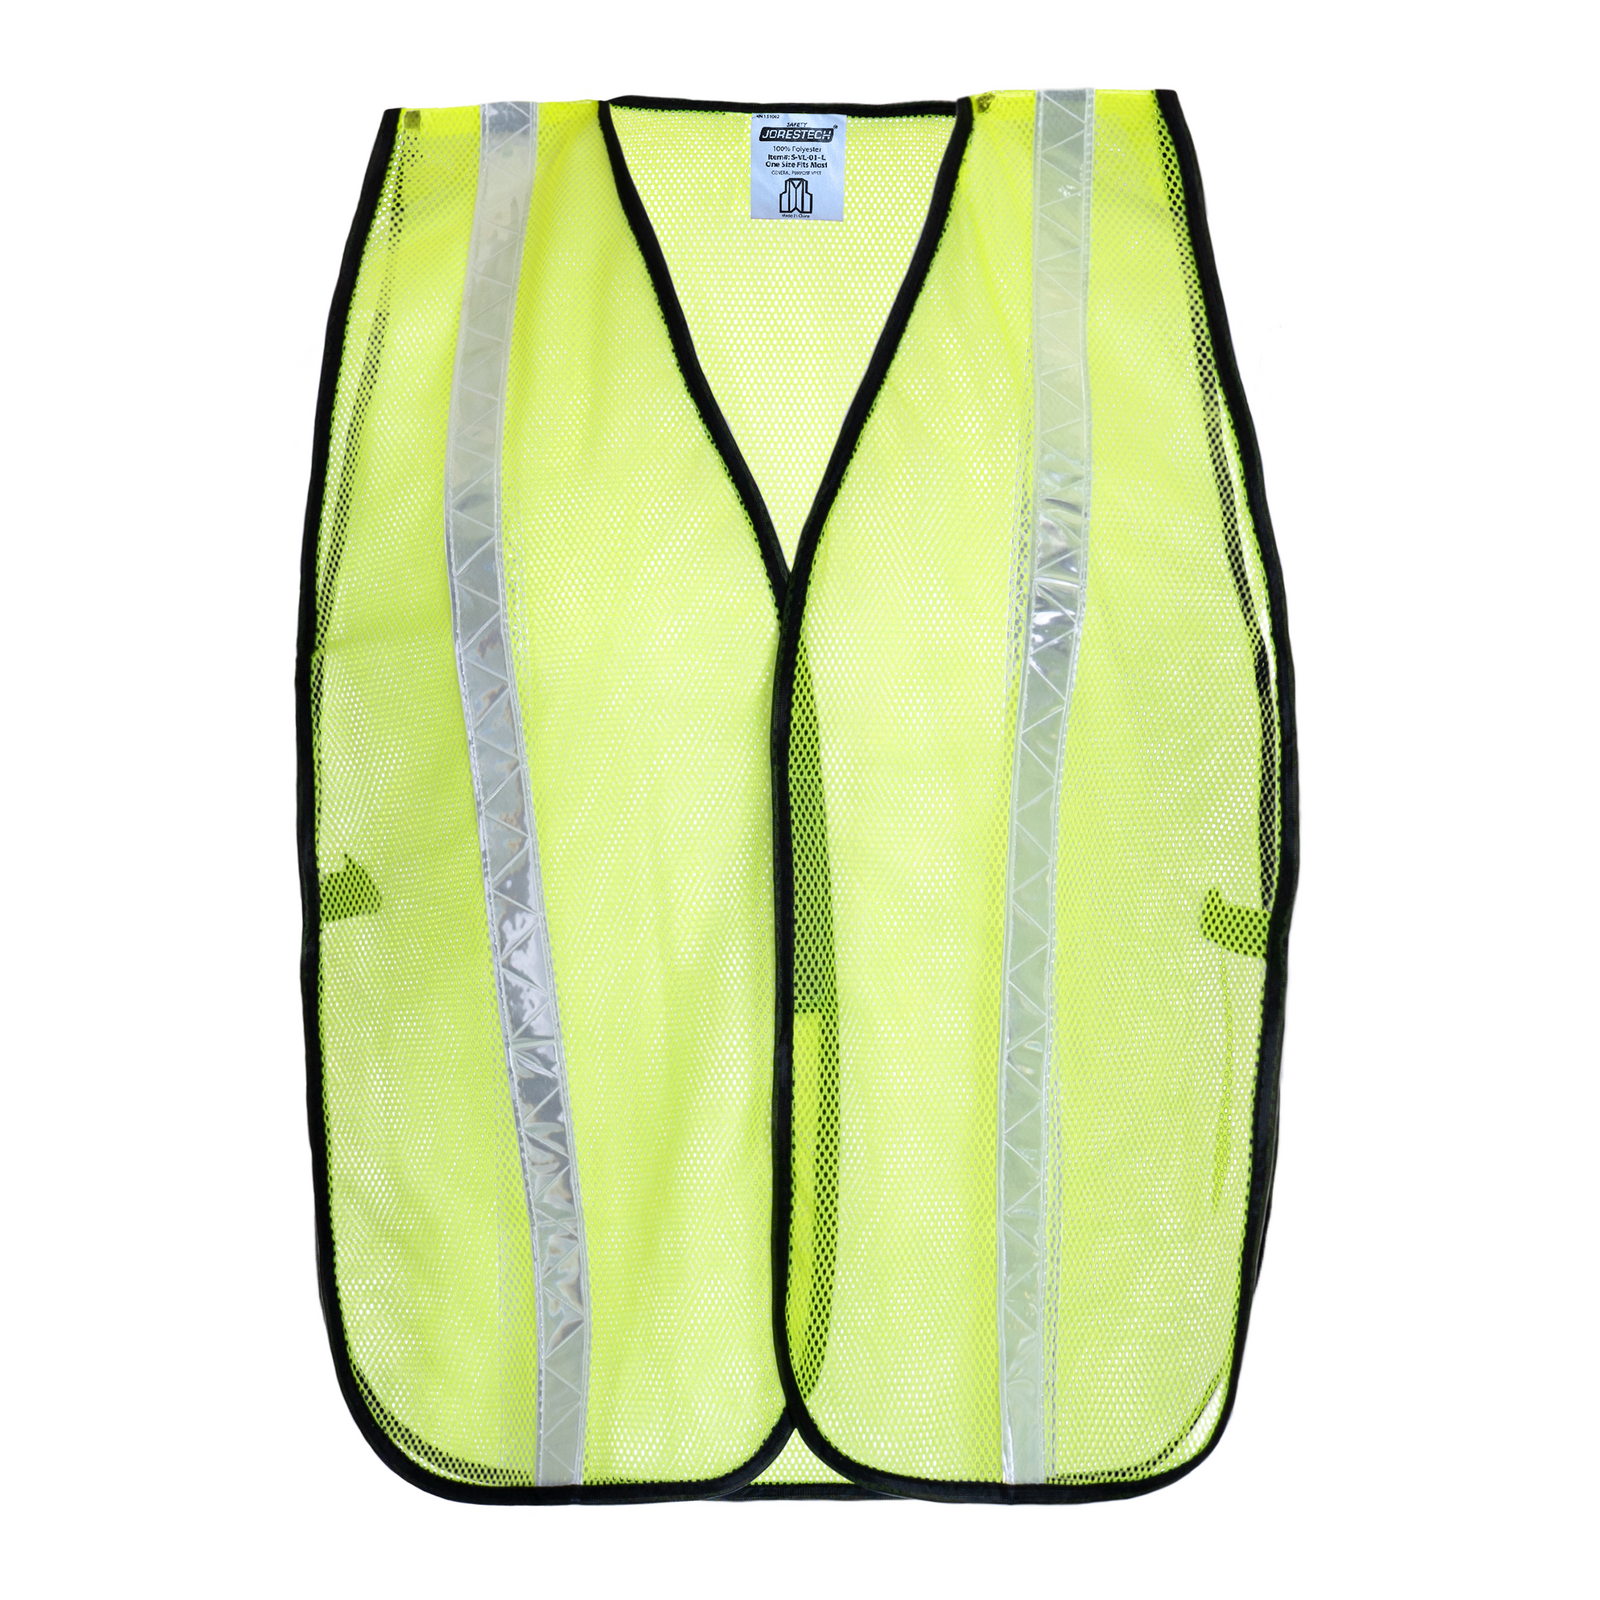 Front view of a yellow/lime hi vis mesh safety vest with 1 inch reflective strip and side elastic straps